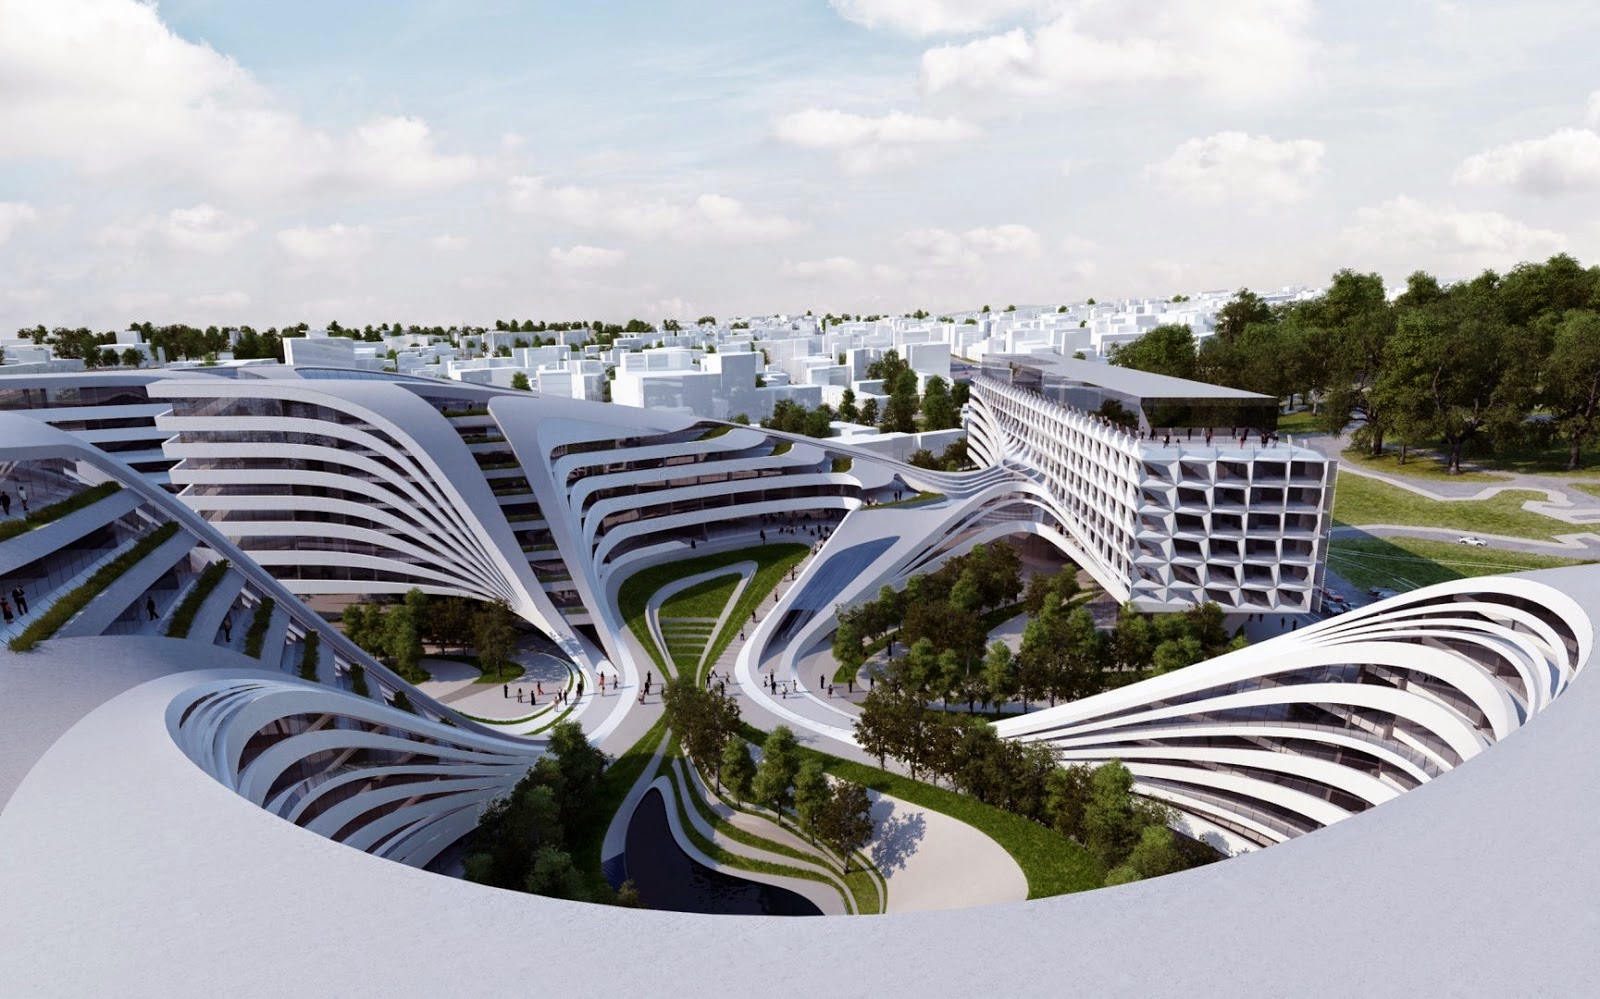 Modern Architecture Zaha Hadid Architects Doing Their Magic With